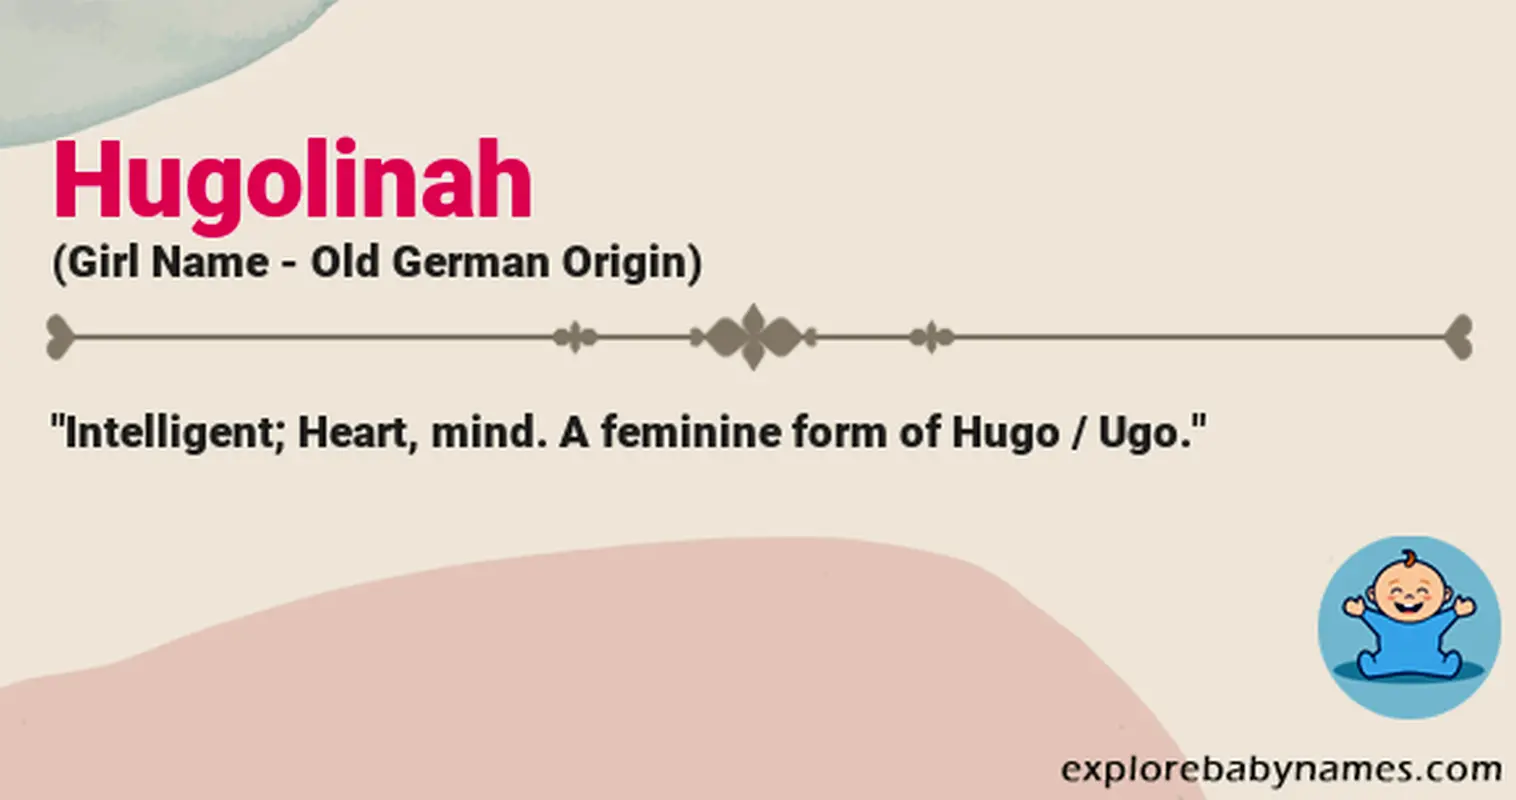 Meaning of Hugolinah